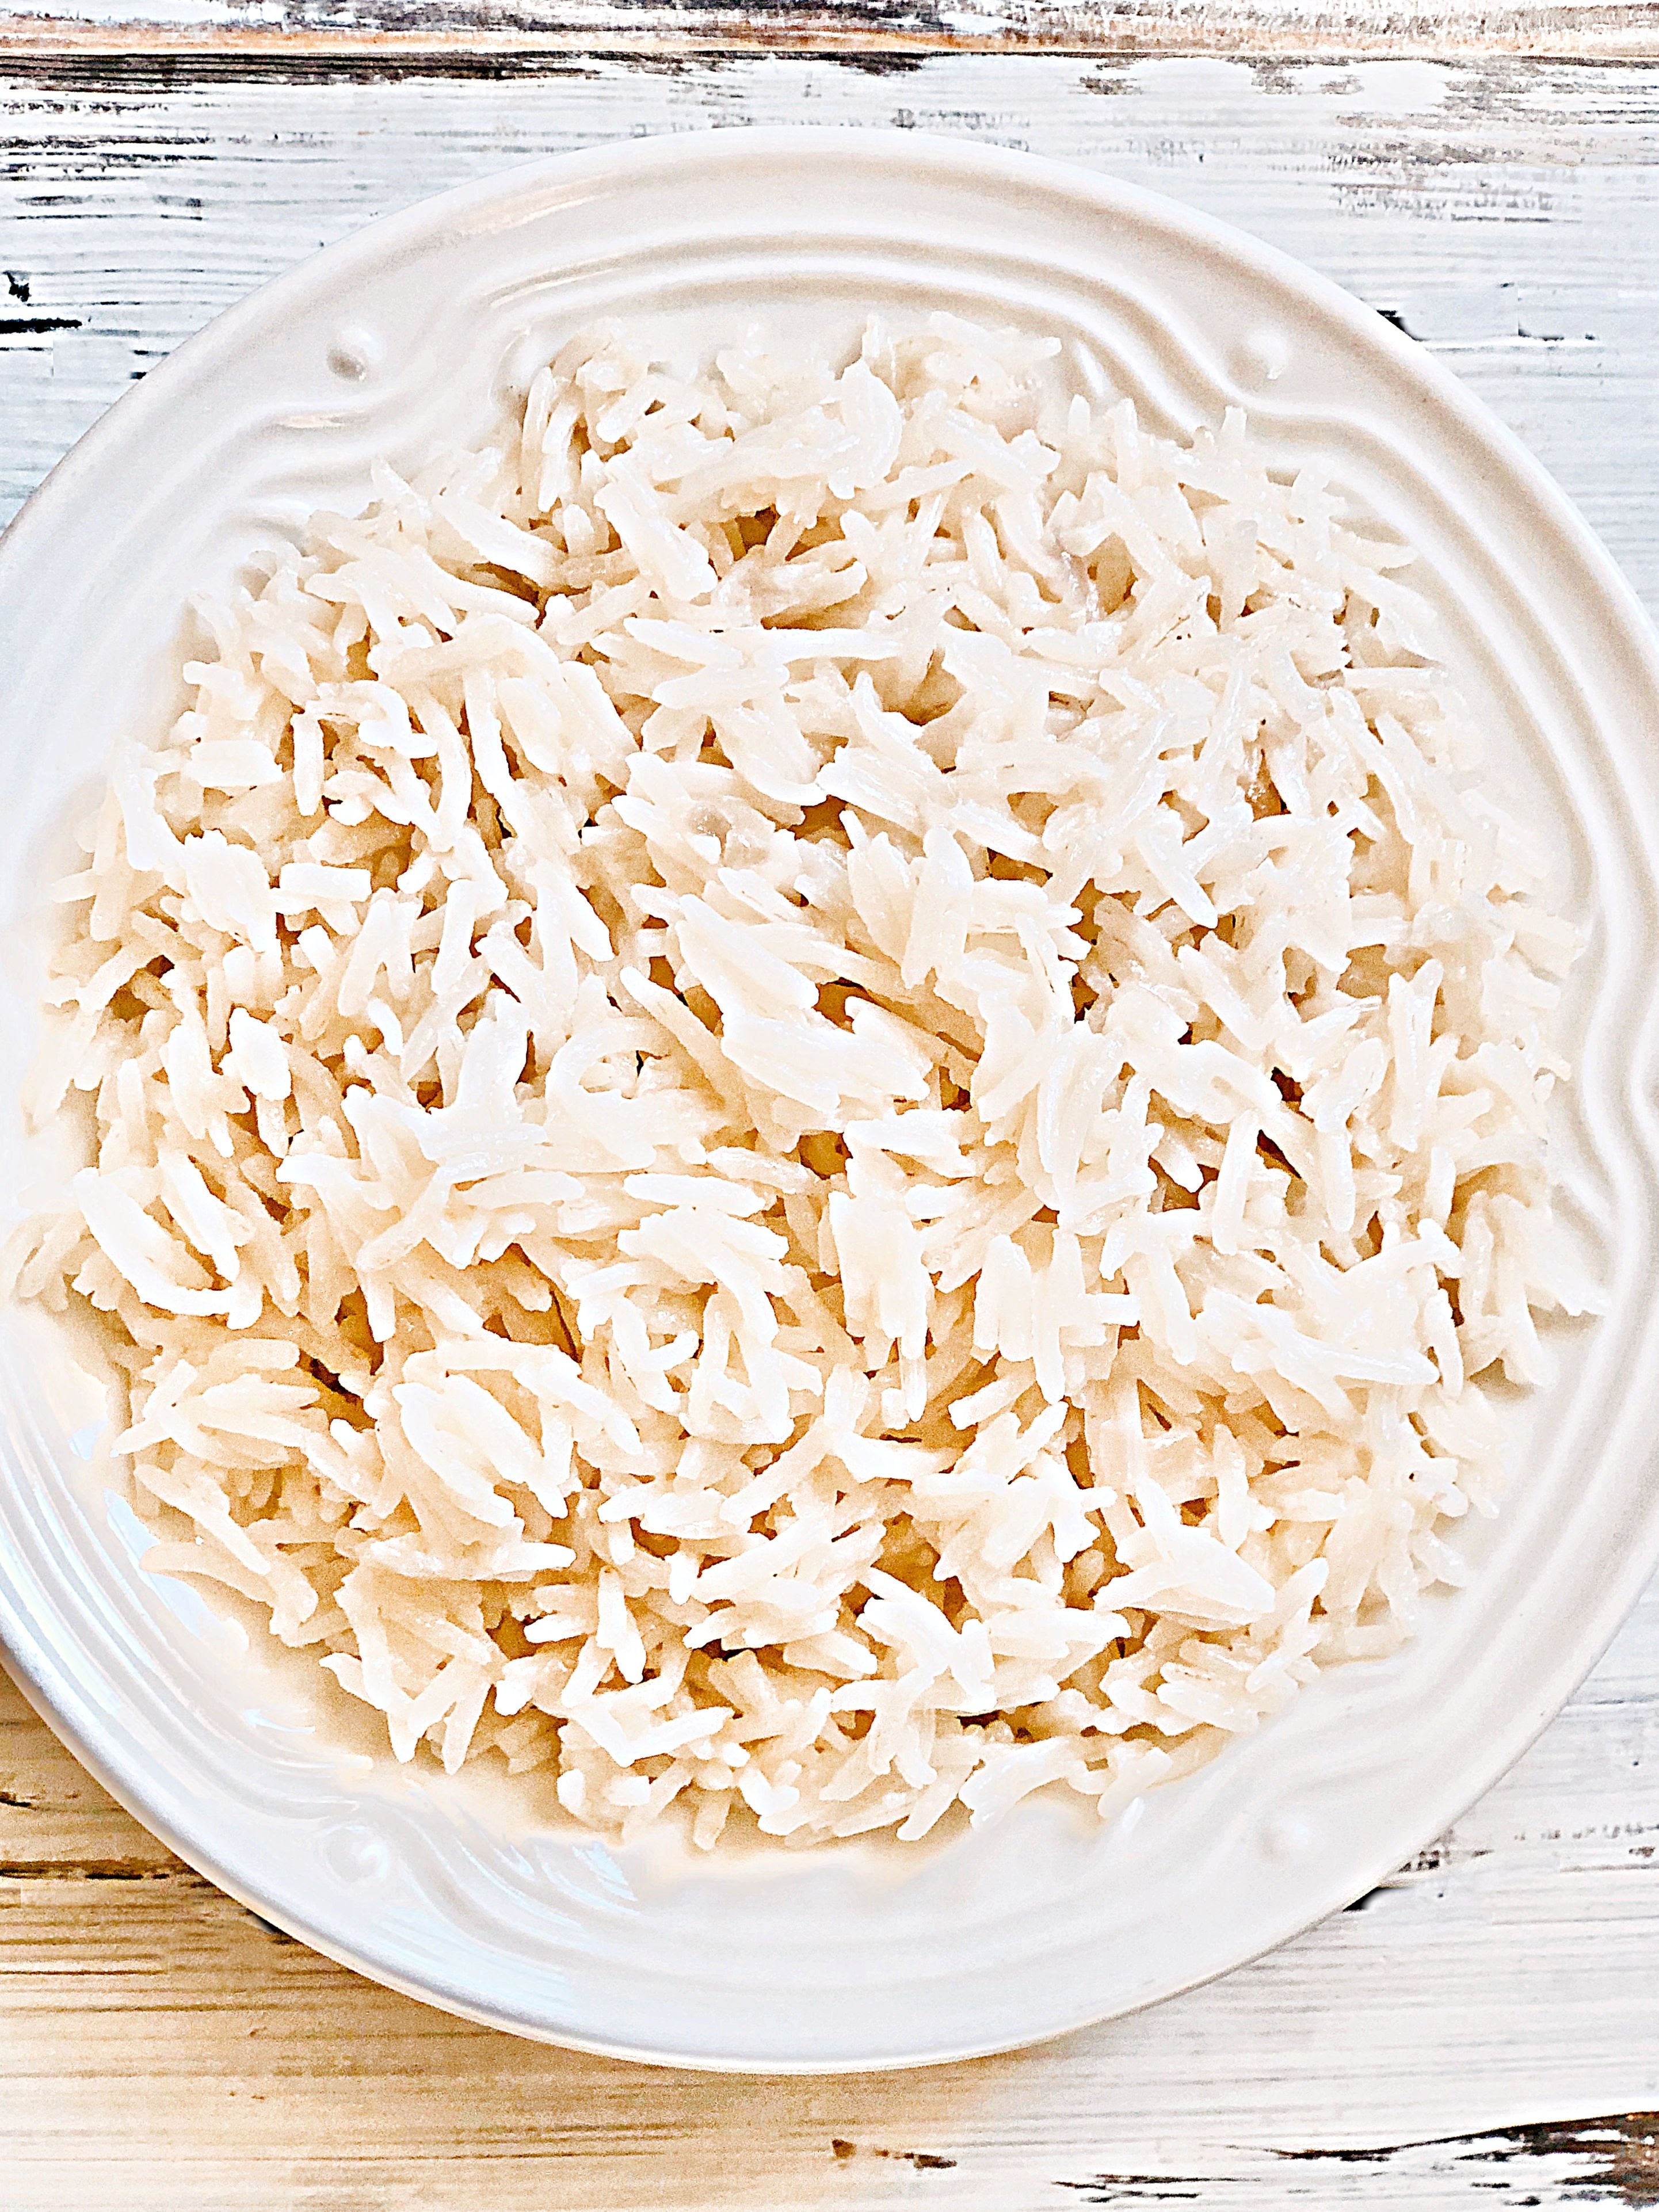 Basmati Coconut Rice - an easy and delicious way to elevate a meal with only a few simple ingredients.

#coconutrice #basmatirice #easyricerecipes #pantryrecipes #quarantinecooking #thiswifecooksrecipes #plantbasedrice #veganrice #indianrice #caribbeanrice via @thiswifecooks